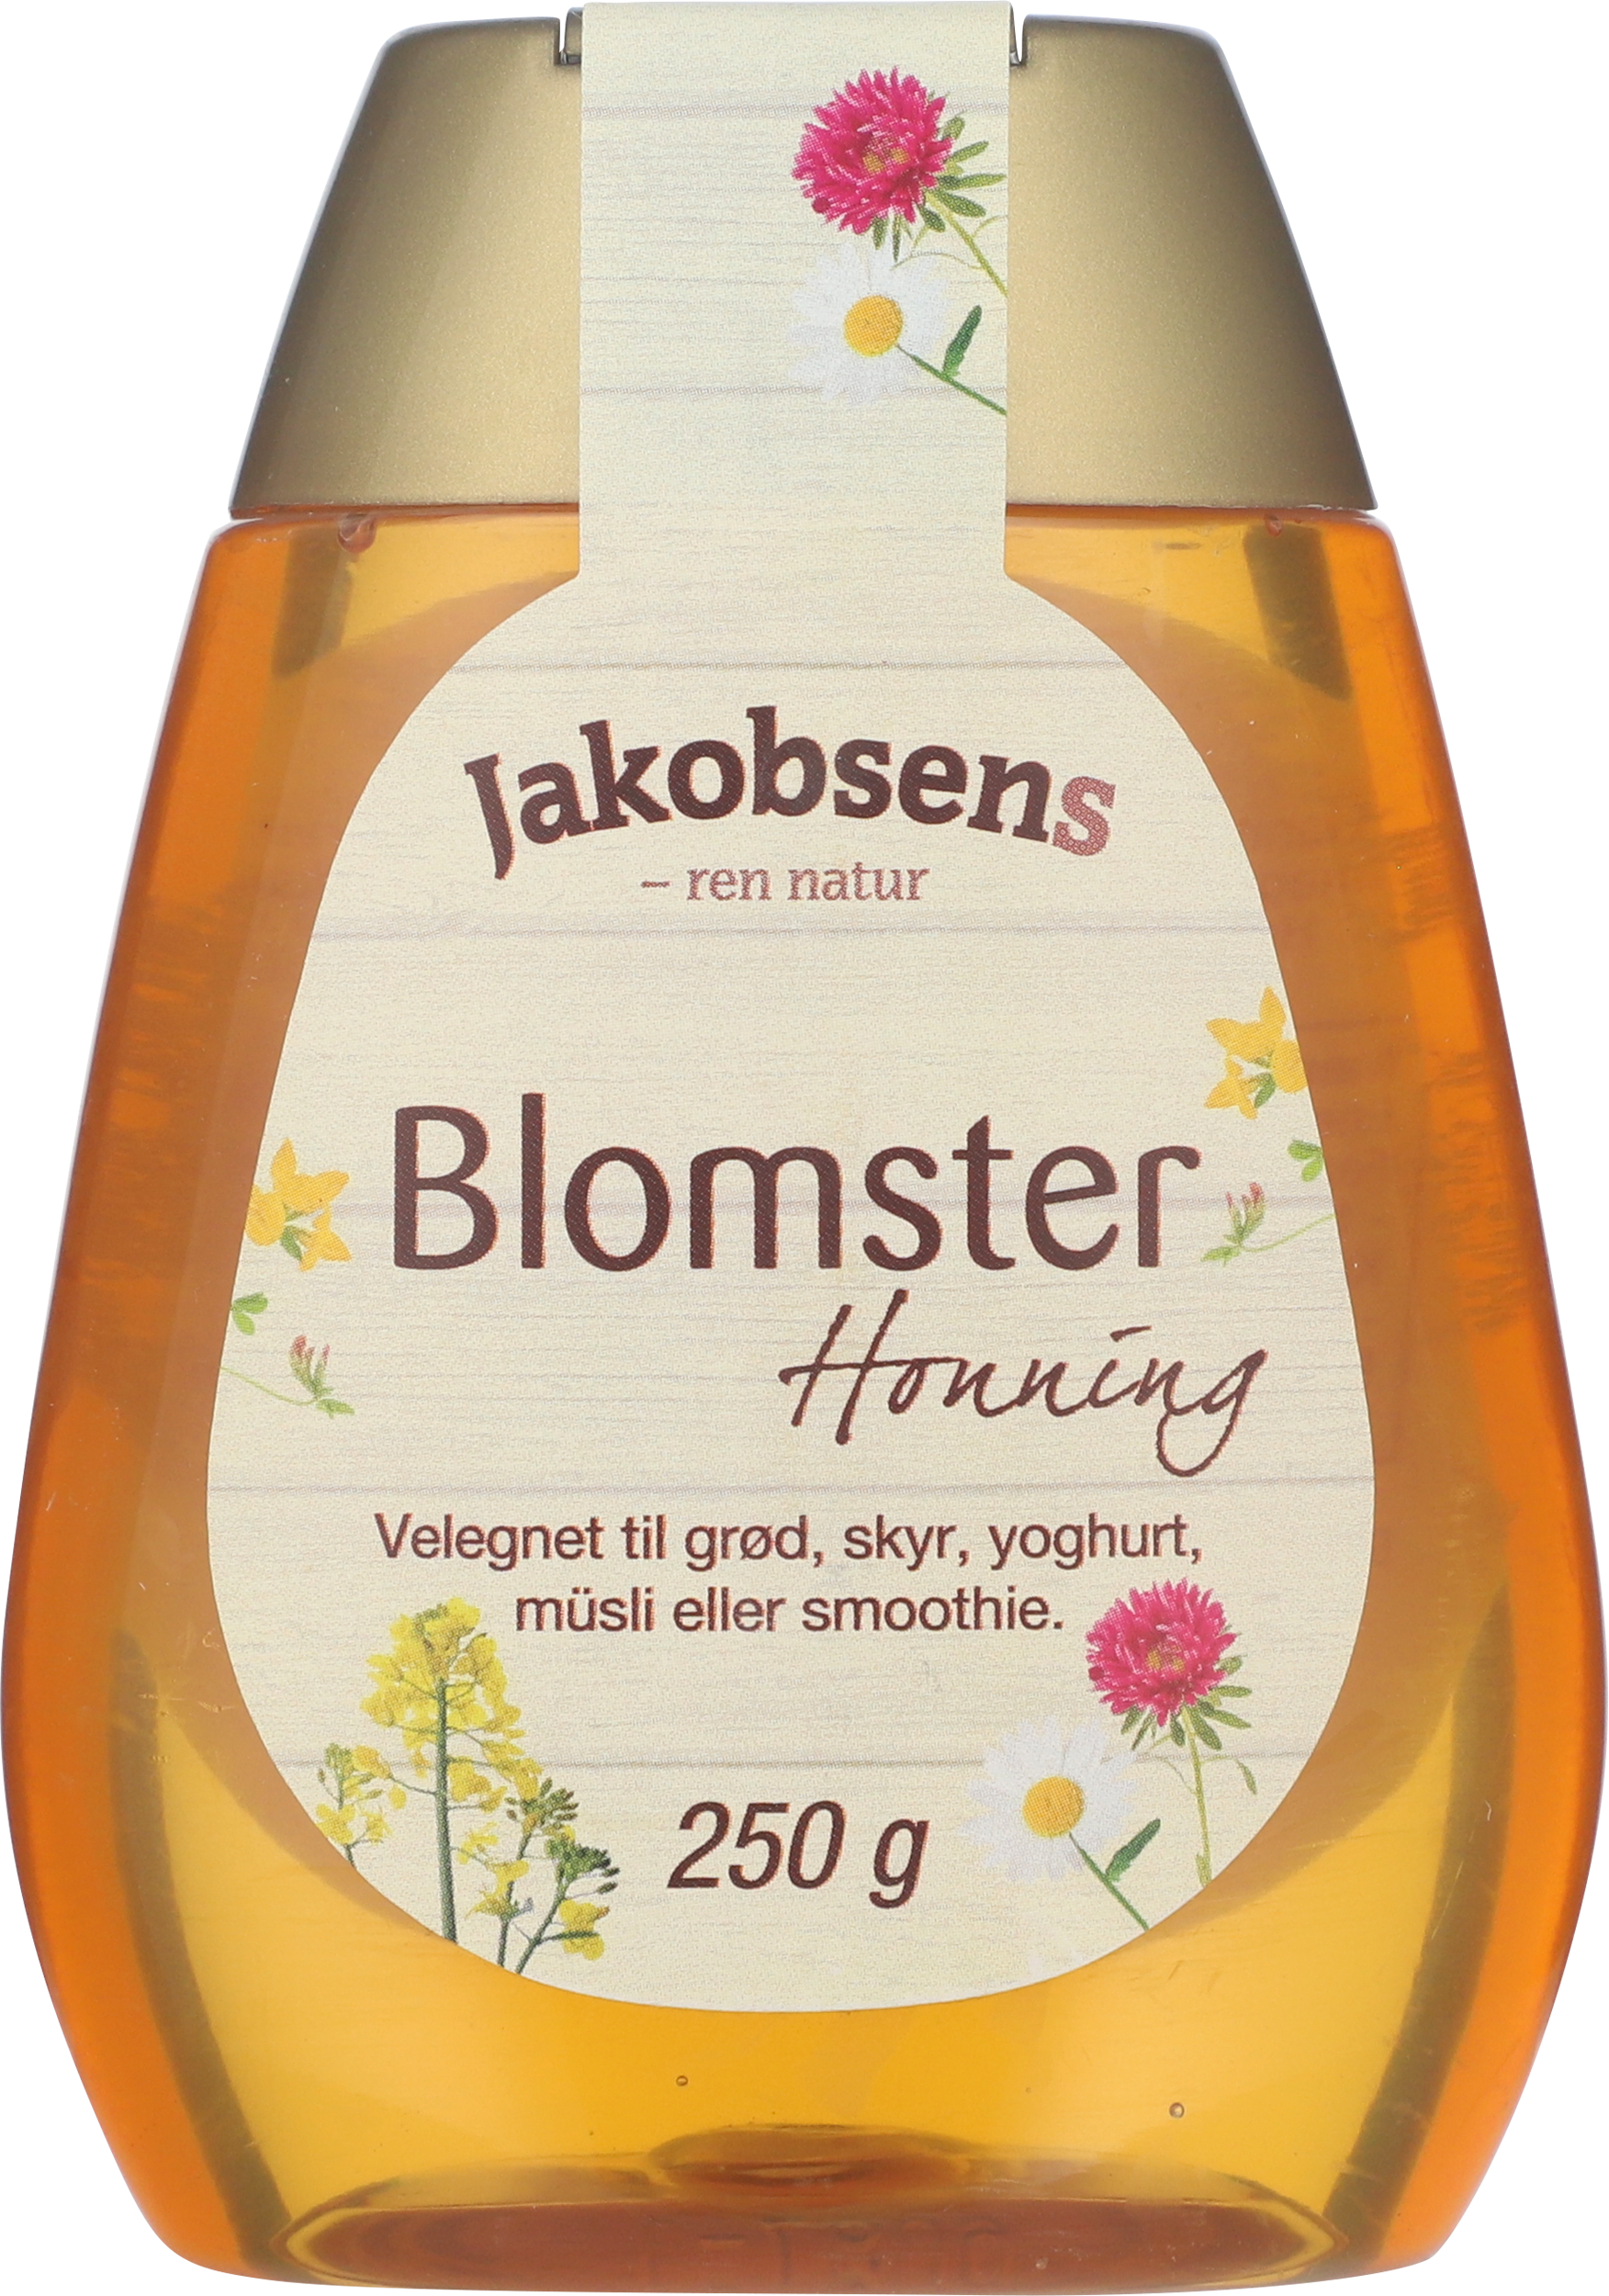 Blomster honning, squeeze